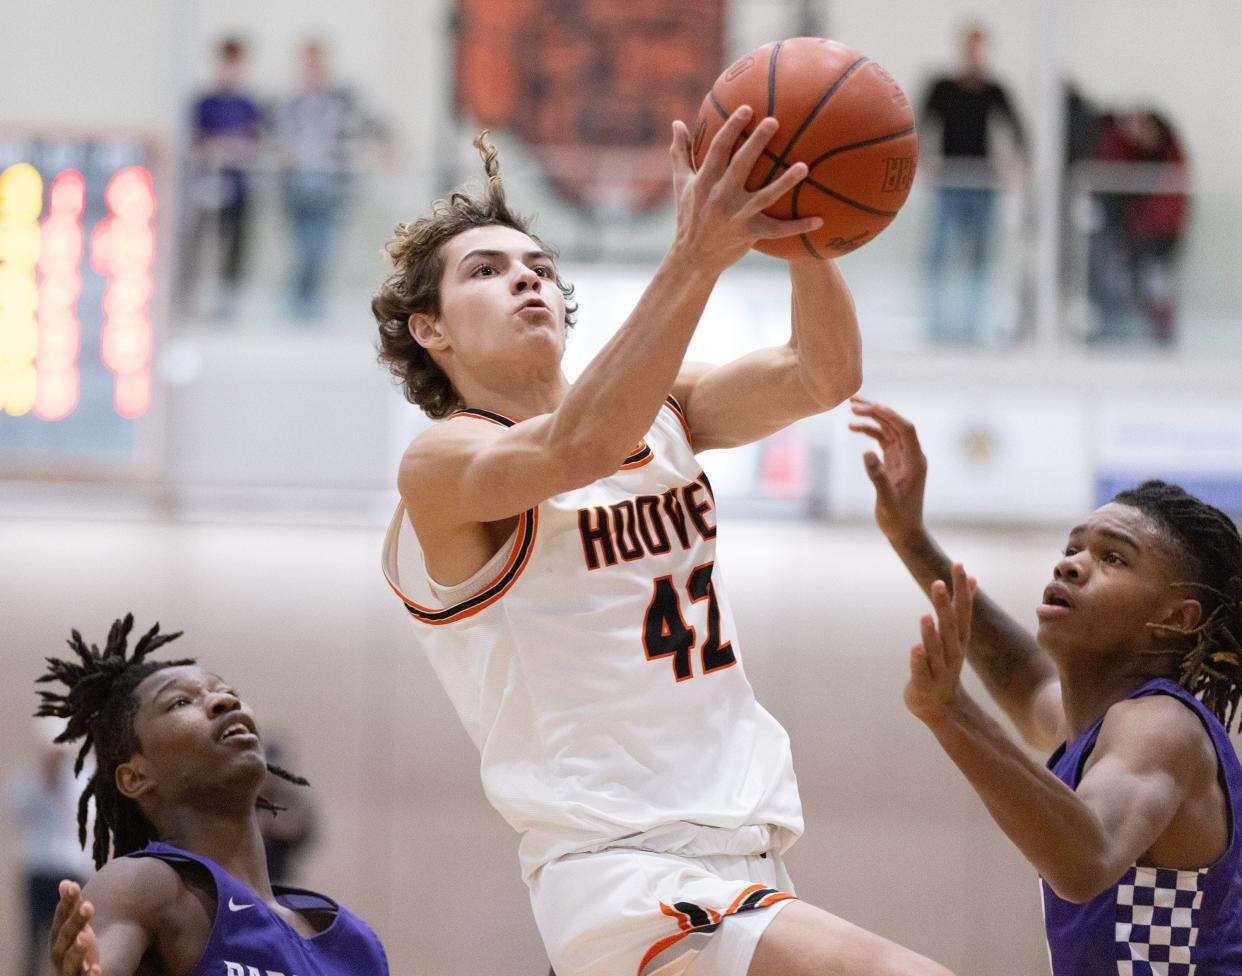 Hoover’s Hunter Hershberger splits Barberton’s defenders during the Hoover Hoops MLK Classic in January. Hershberger scored 9 points in Saturday's sectional final win over Avon Lake.